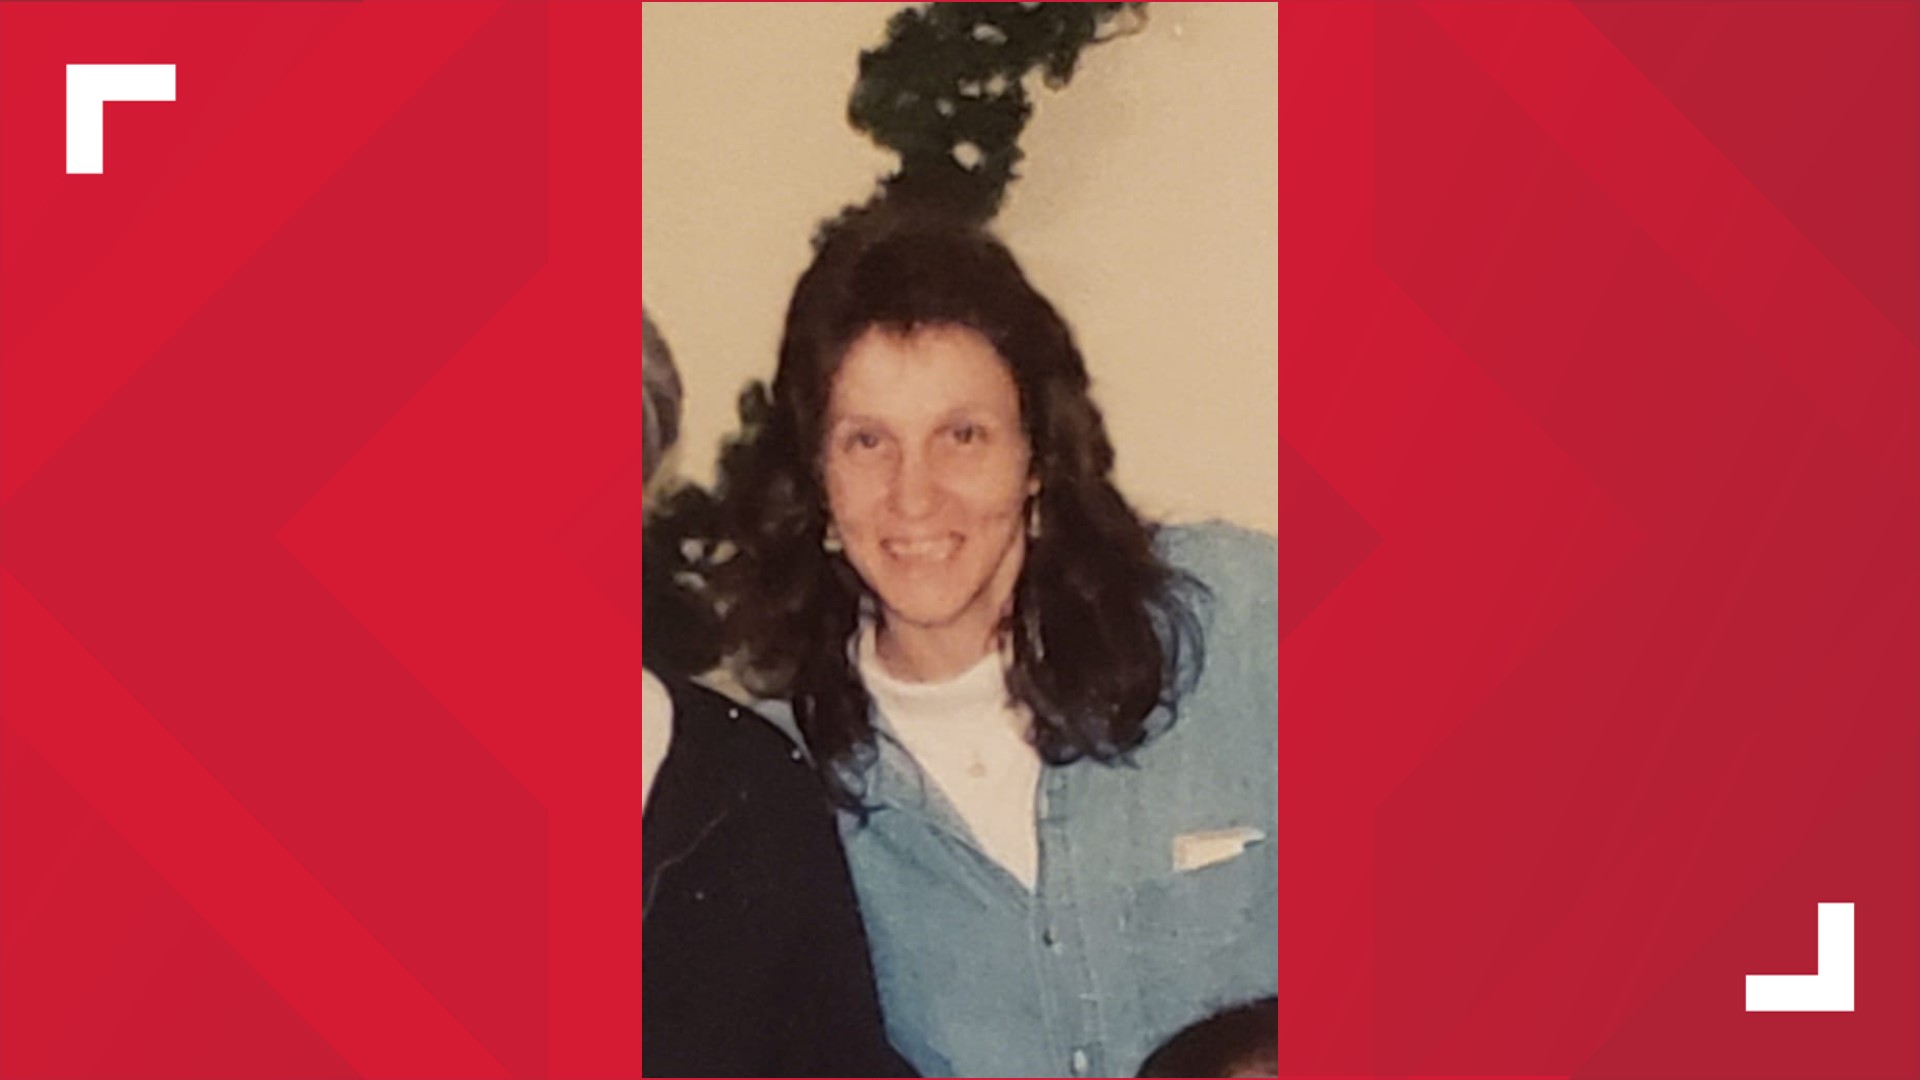 The Lucas County Coroner's Office identified Jane Doe as 54-year-old Diana Turk Tuesday.